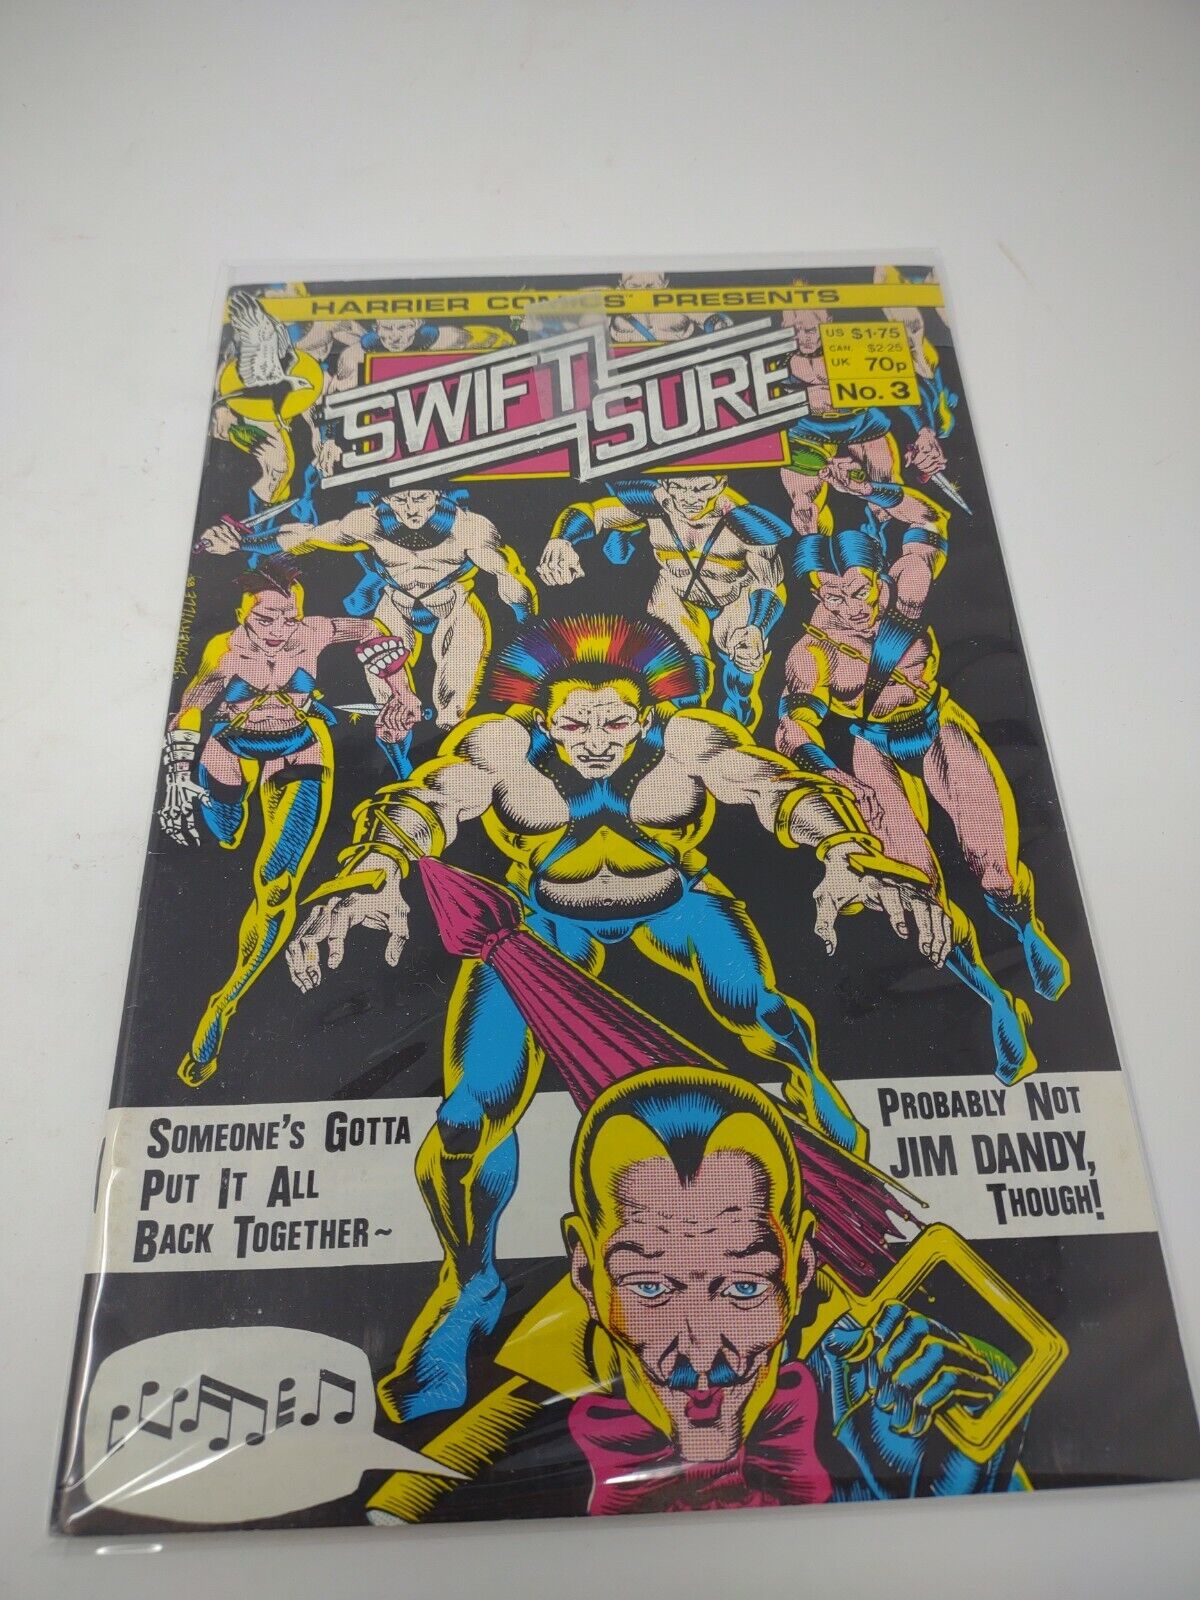 Harrier Comics Presents Swift Sure No 3 Rare Issue Bagged and Boarded